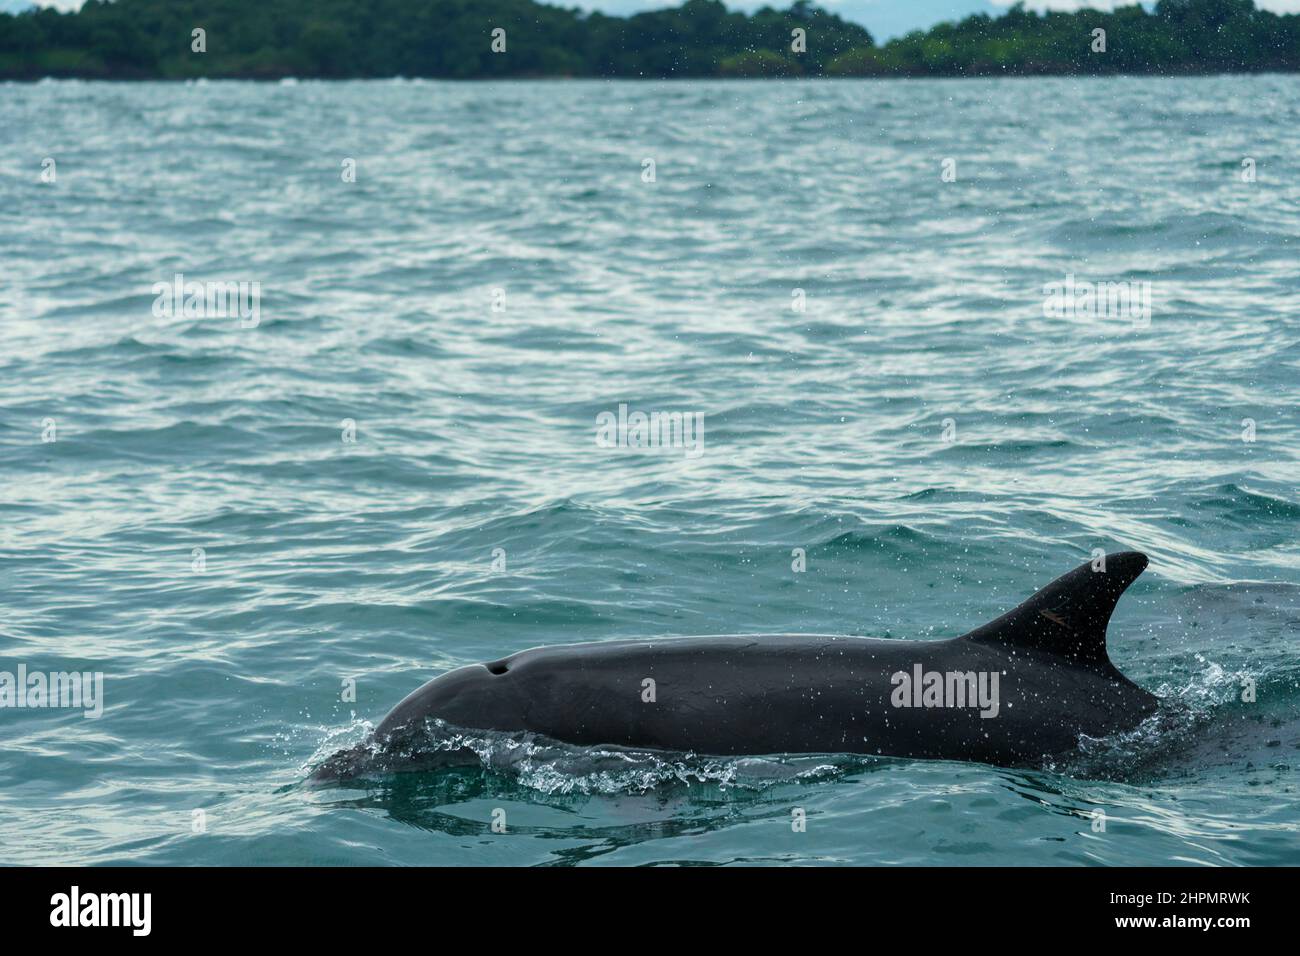 Dolphin coming up for air in the along the Pacific coast of Panama. Land is visible in the distance. Stock Photo